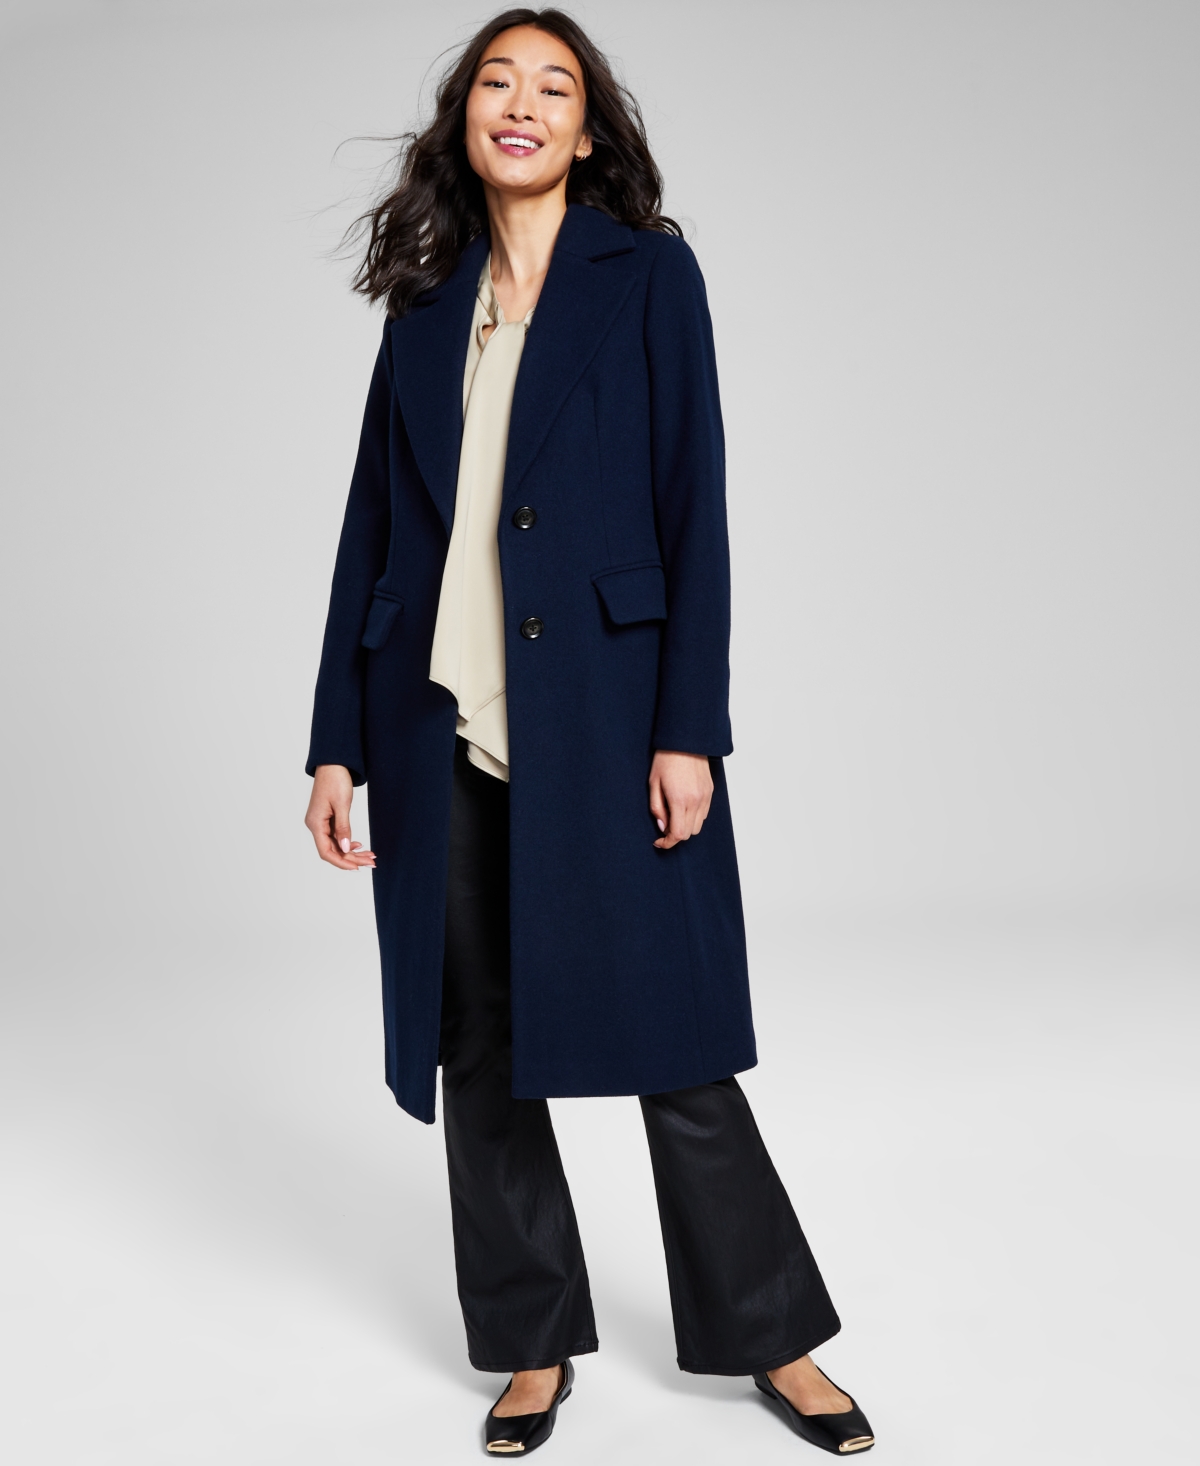 Michael Michael Kors Women's Single-Breasted Wool Blend Coat, Created for Macy's - Midnight